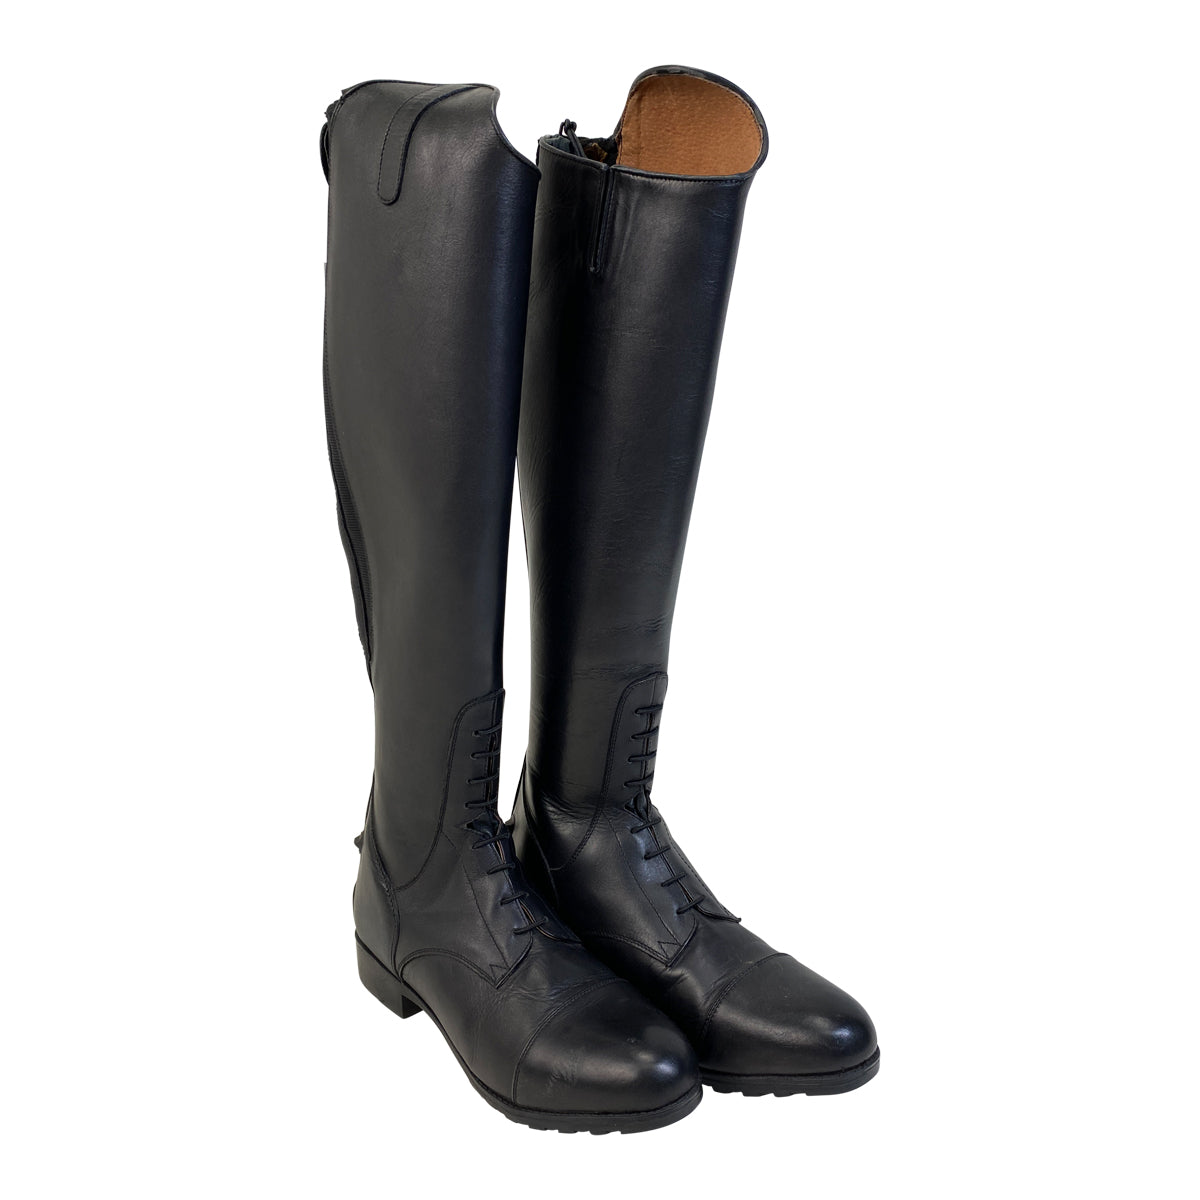 Mountain Horse Tall Boots in Black